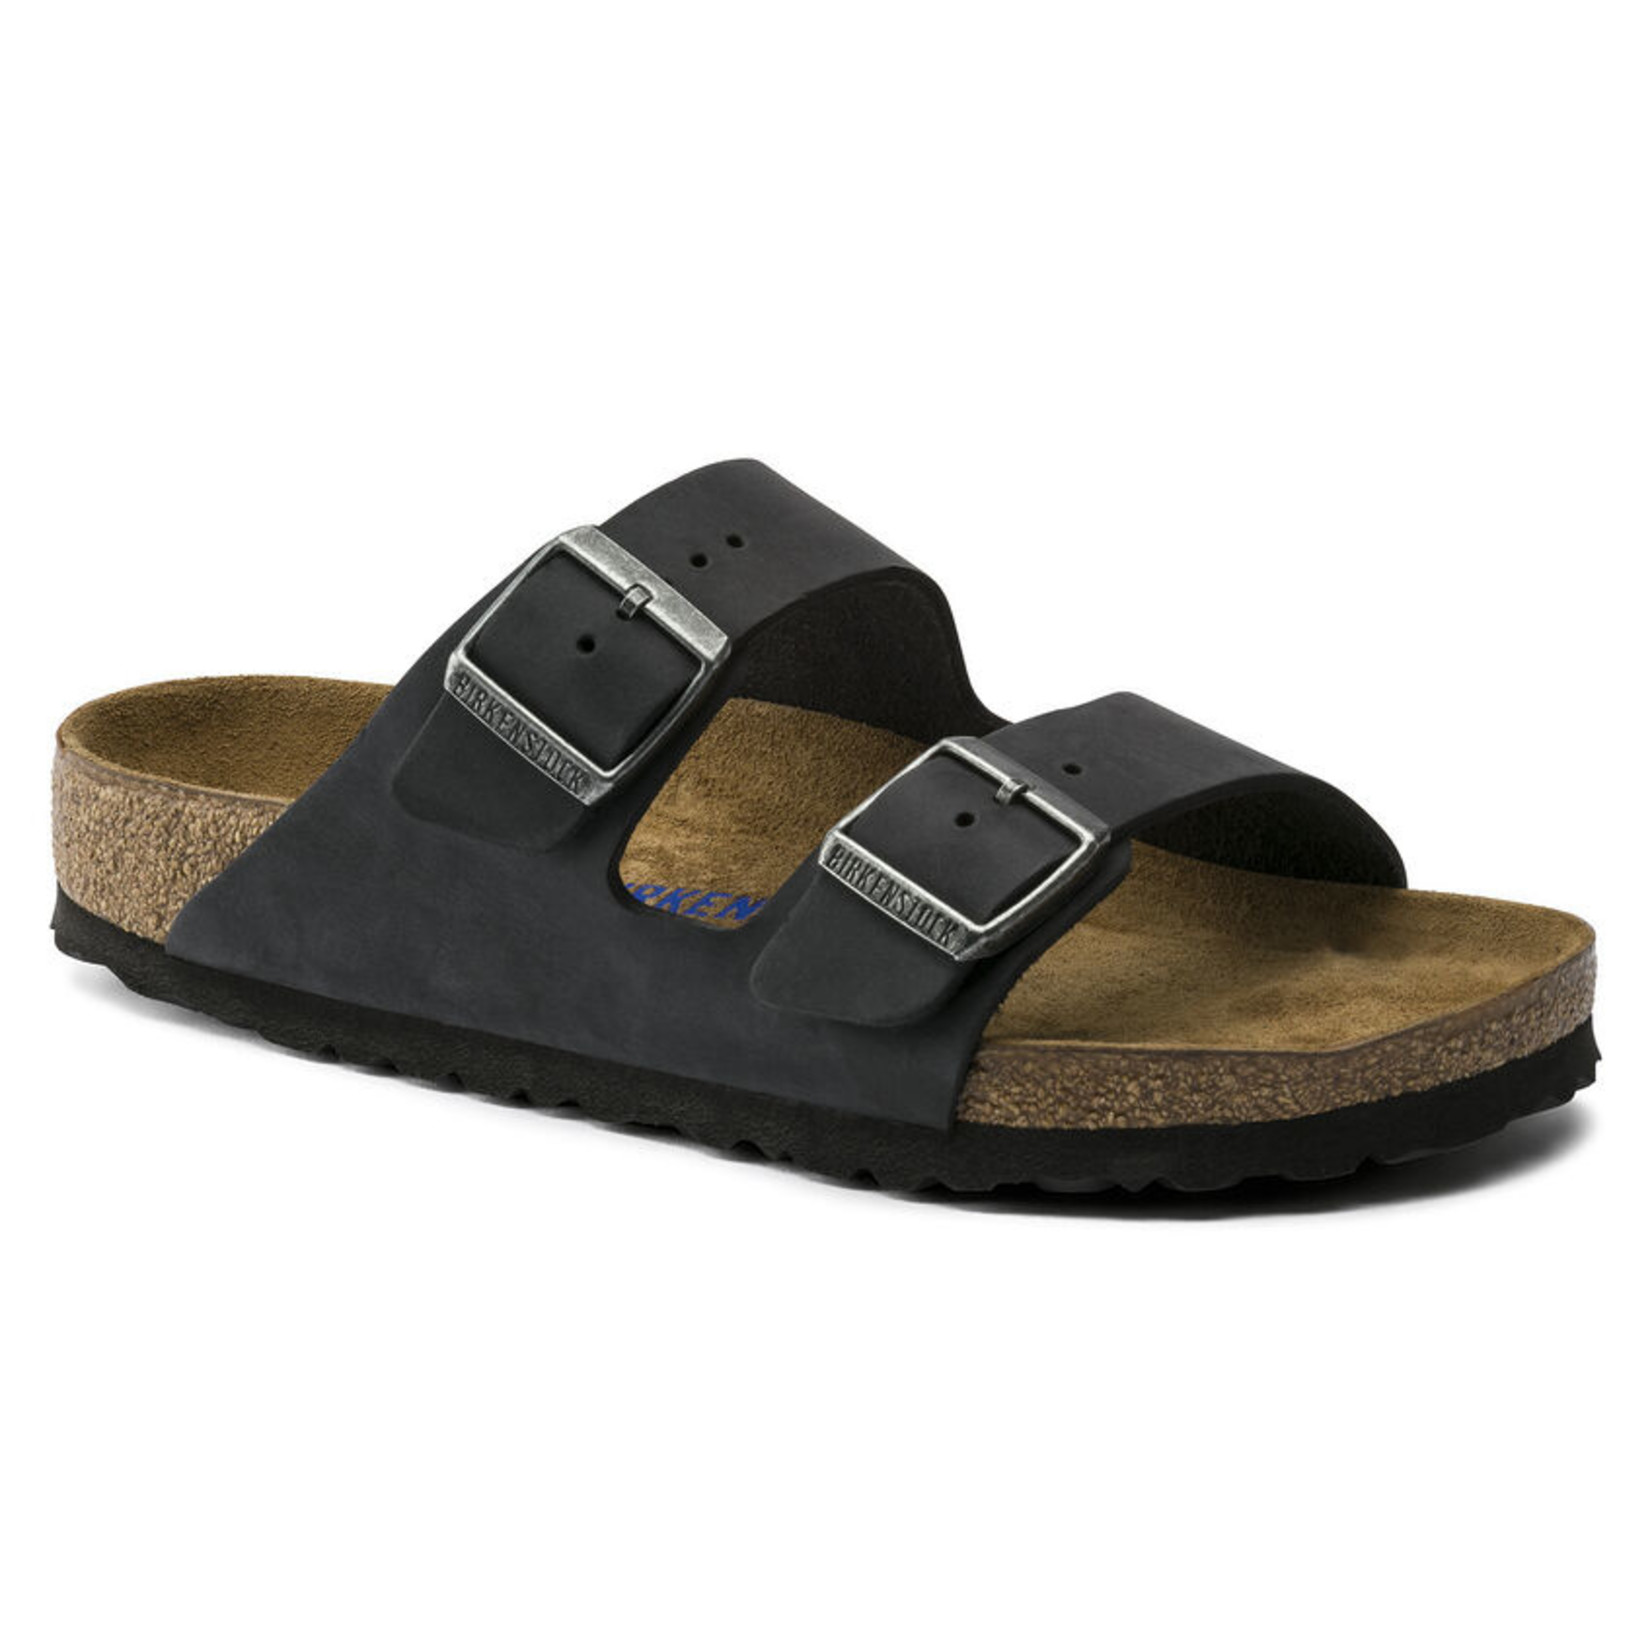 Birkenstock Arizona BS Oiled Leather Sandals - Shippy Shoes